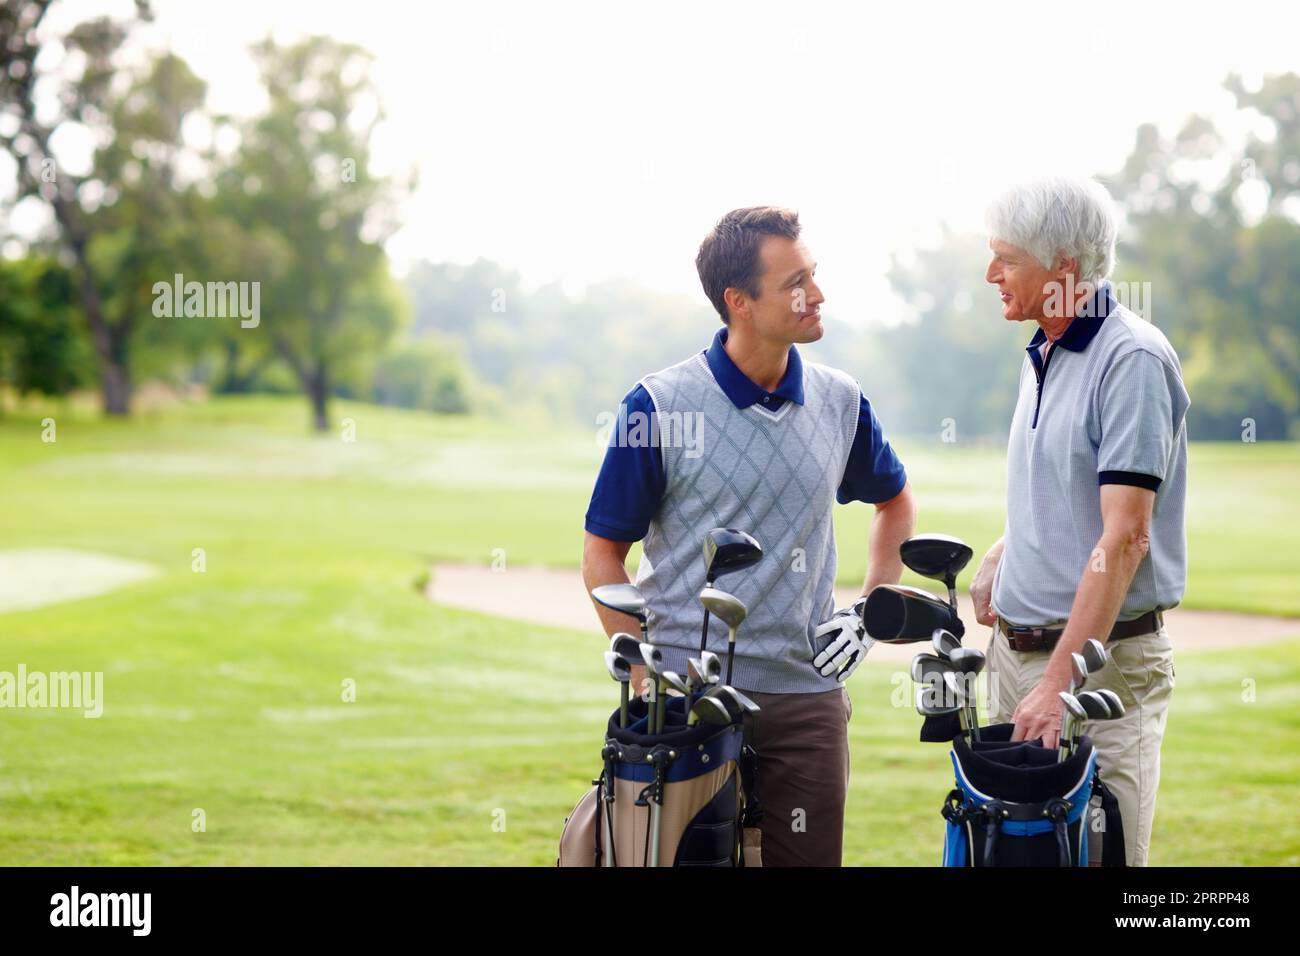 Two golfers in discussion. Father and son standing on golf course and discussing with each other. Stock Photo